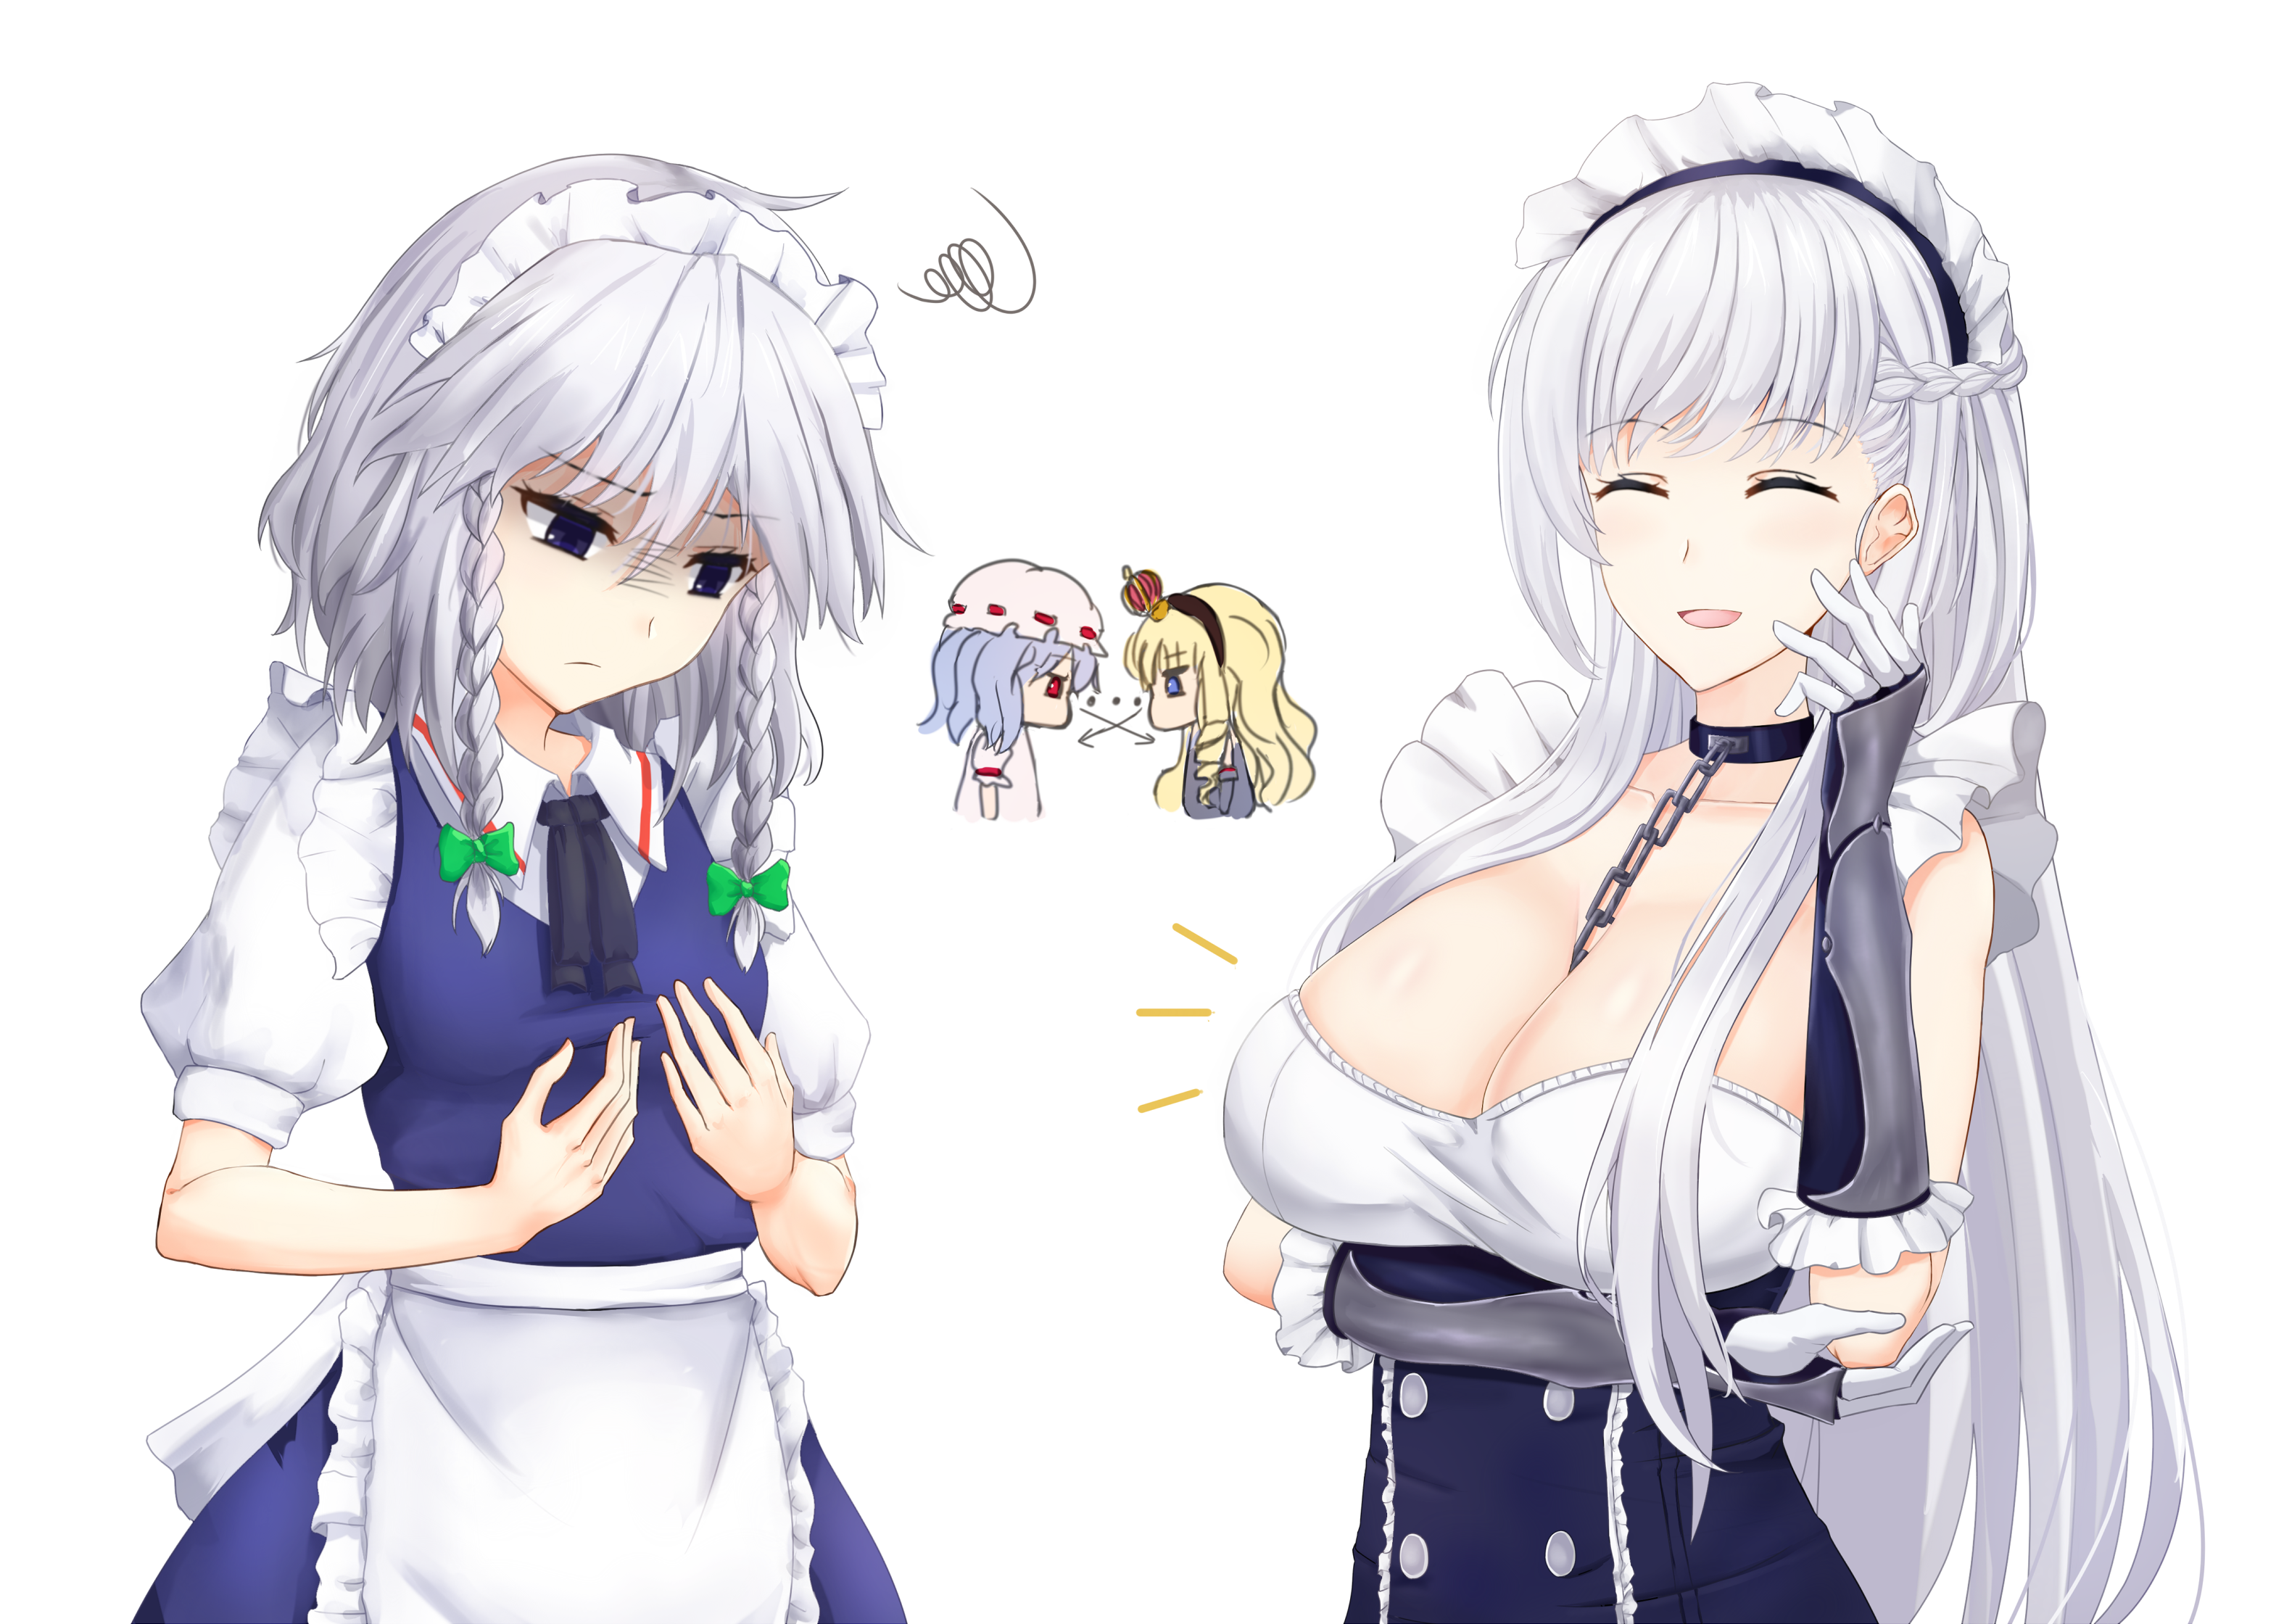 I find it strangely endearing that sakuya is insecure about not being "...